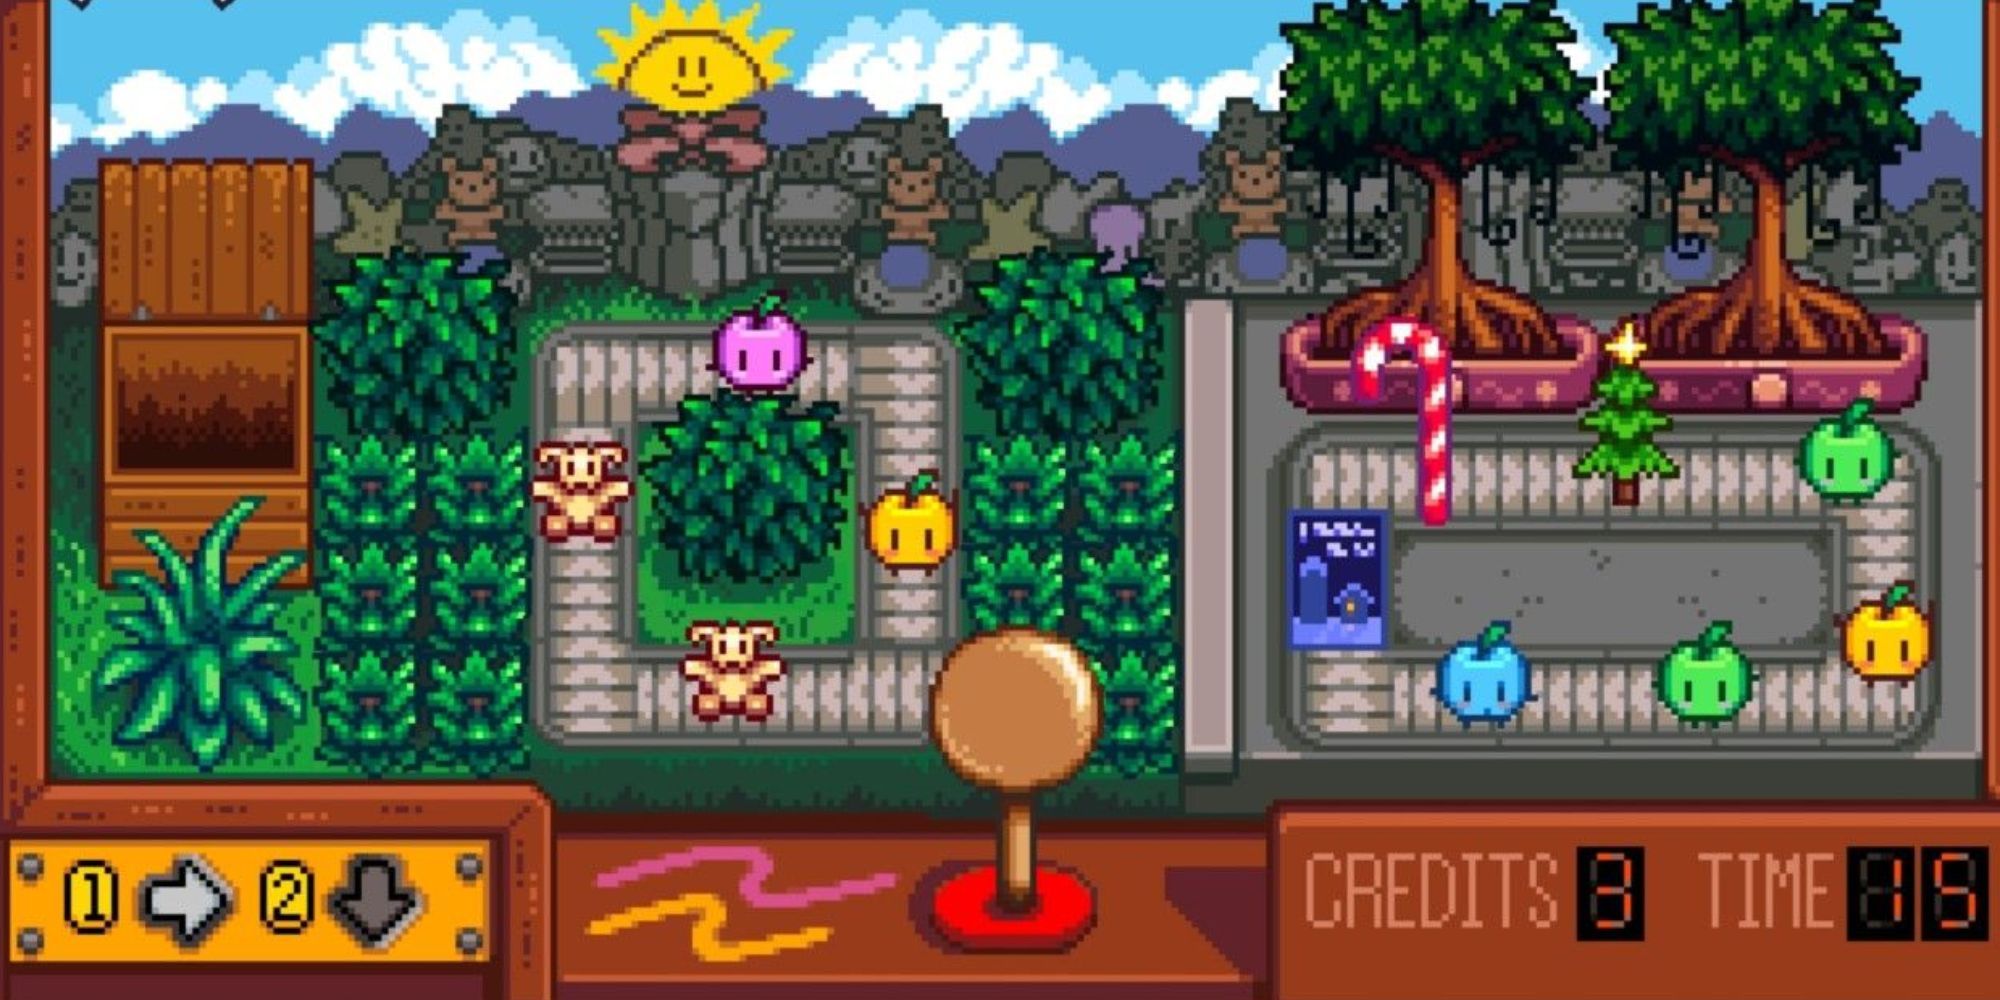 Crane Game in Stardew Valley featuring many prizes